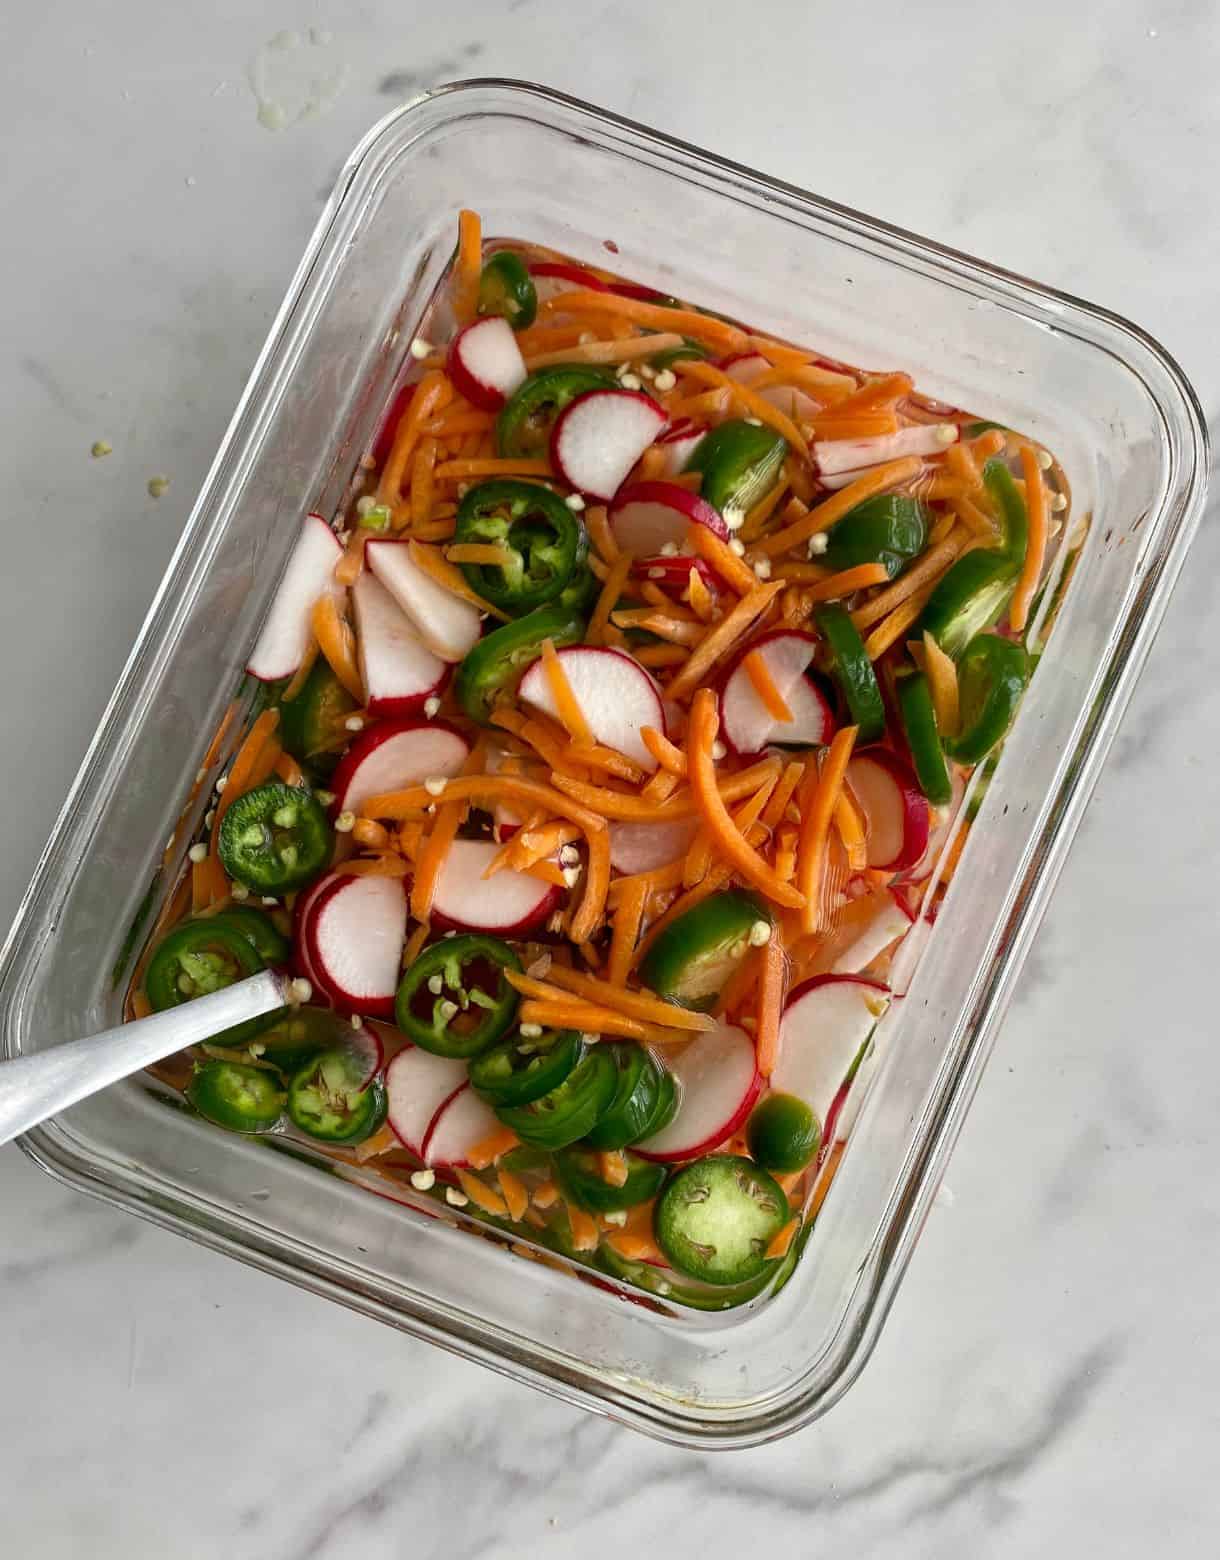 A container of Vietnamese Pickled Vegetables with sliced jalapenos, sliced radishes and shredded carrots floating in vinegar.